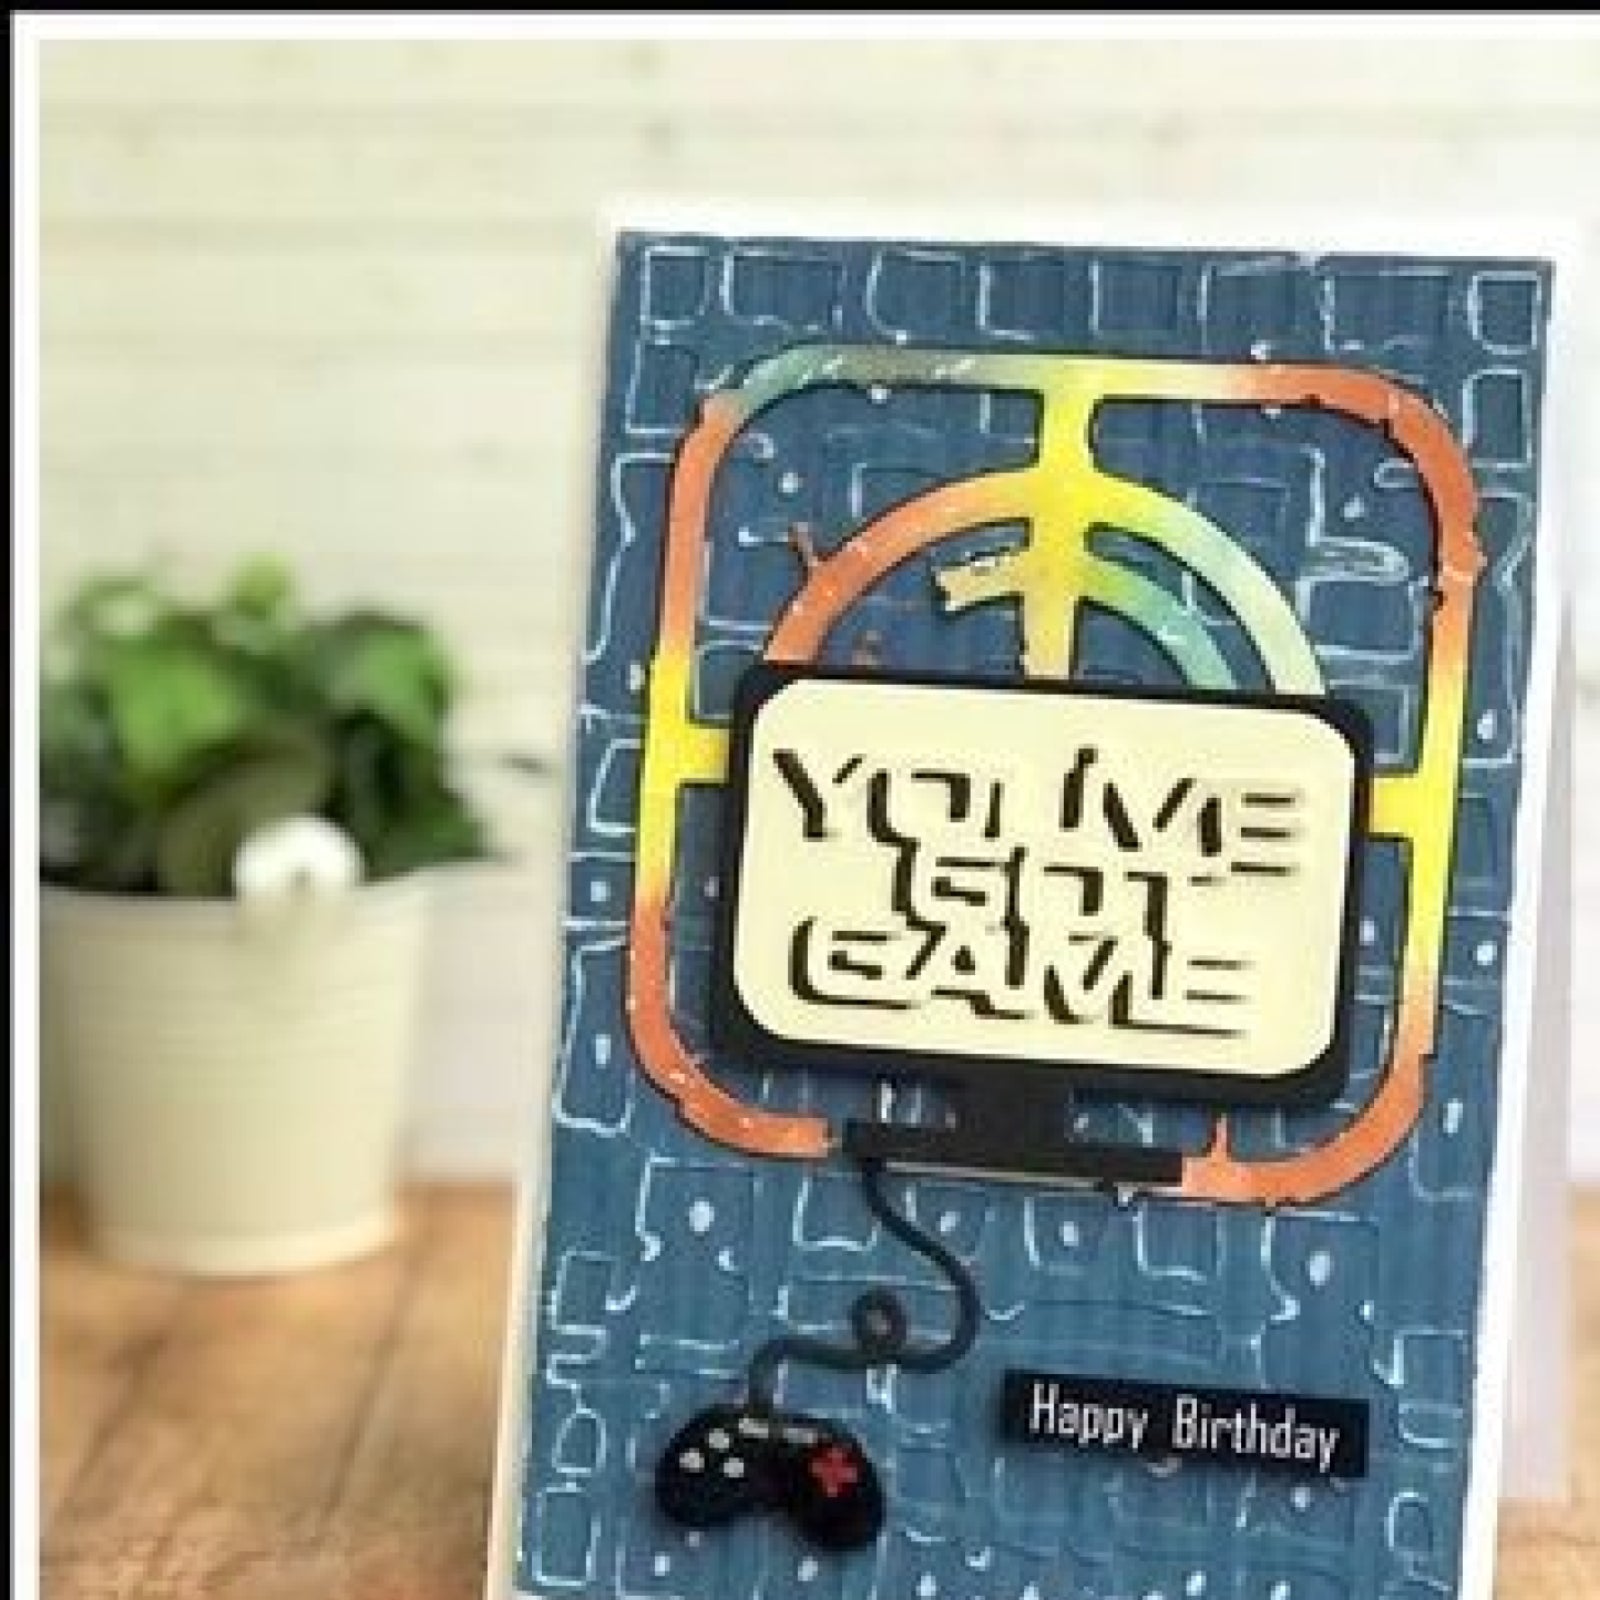 You’ve Got Game Video Gaming Cutting & Embossing Dies